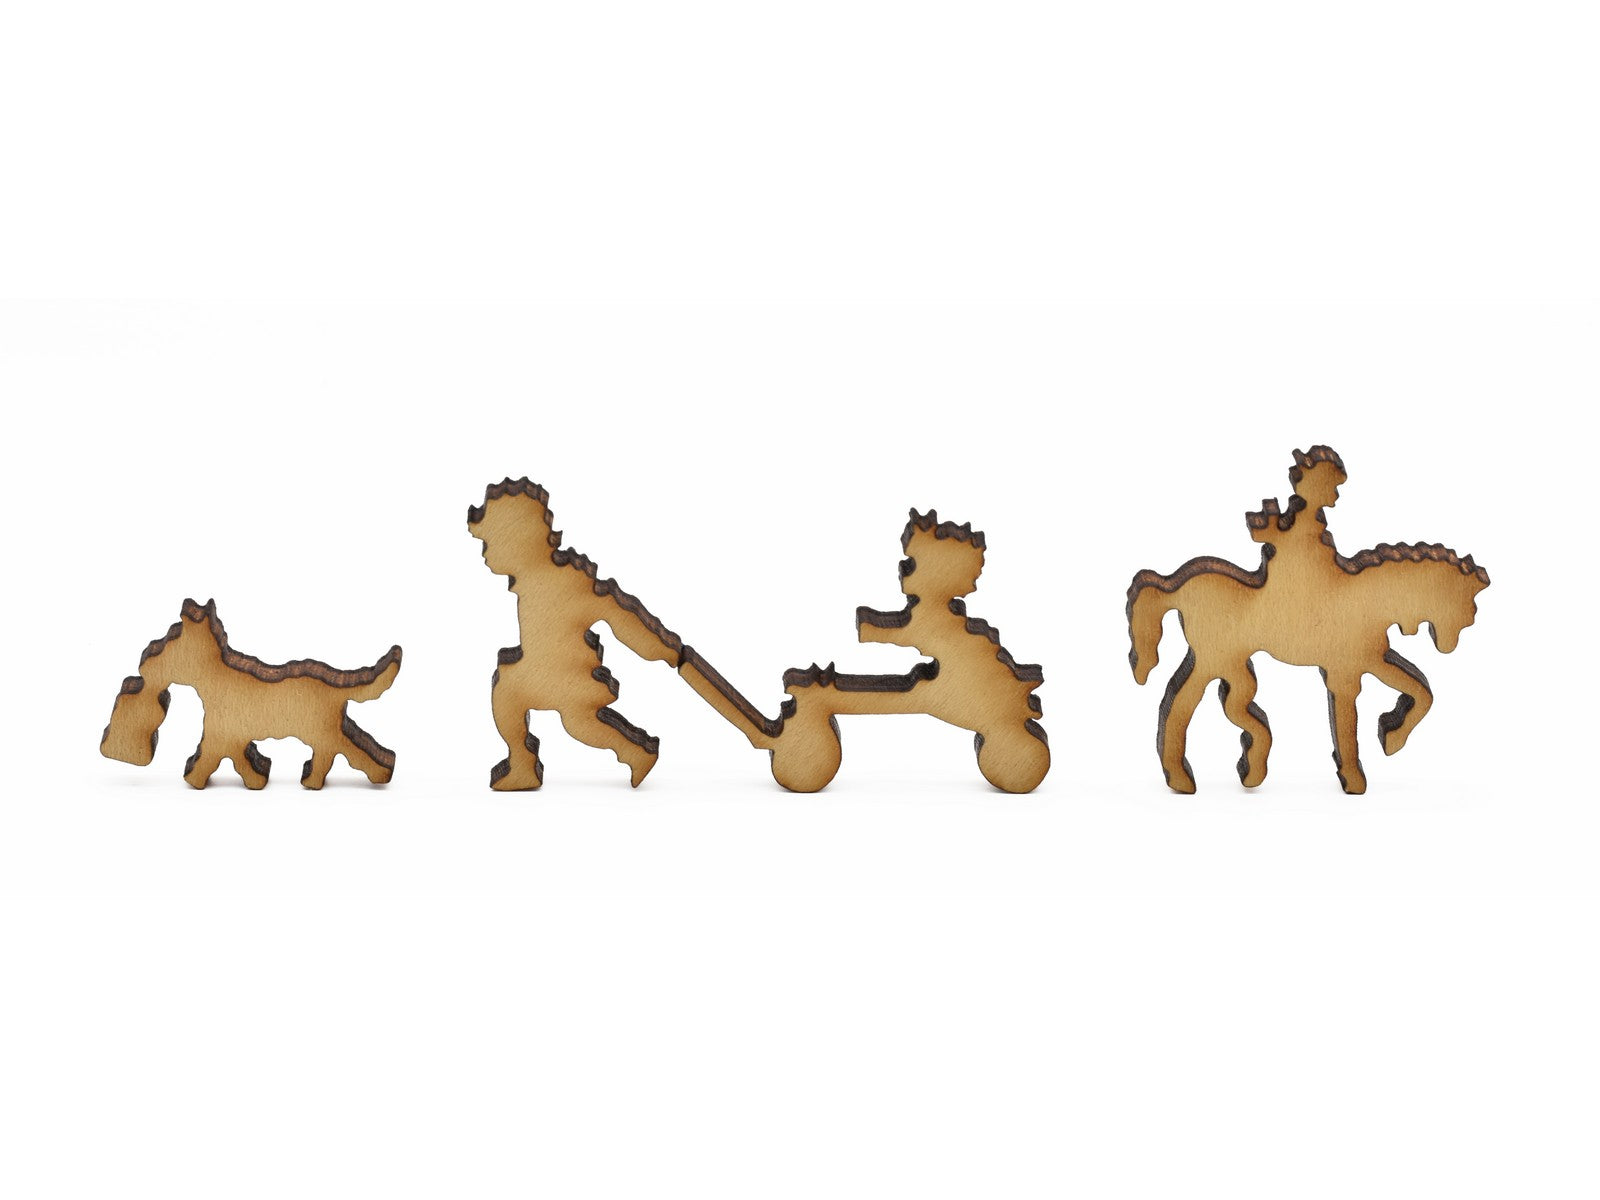 A closeup of pieces in the shape of children playing and a dog.